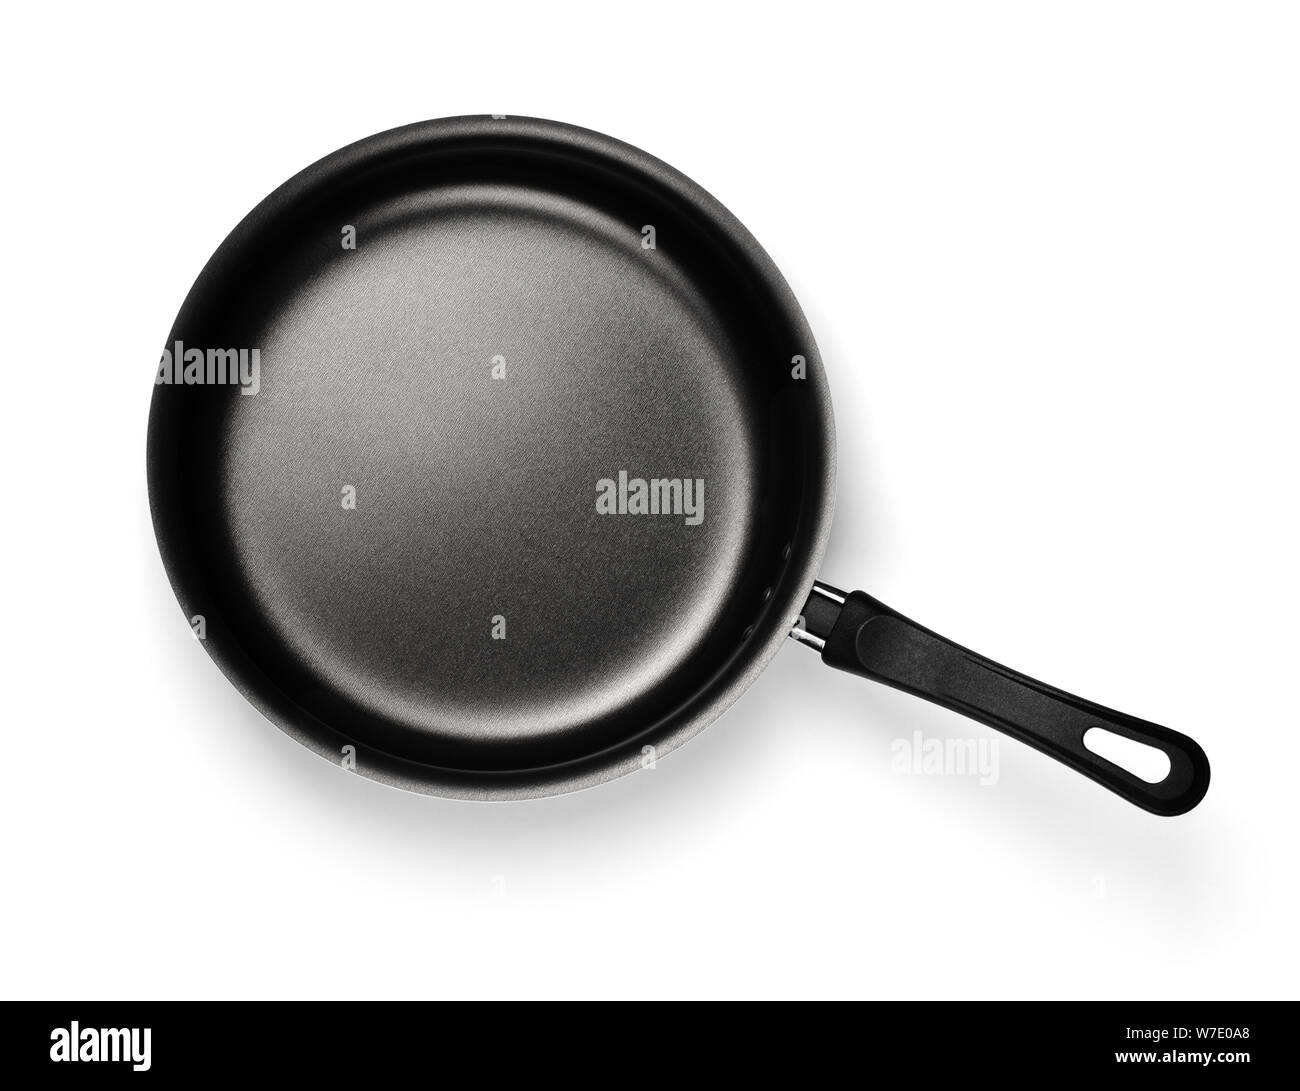 https://c8.alamy.com/comp/W7E0A8/top-view-of-new-empty-nonstick-frying-pan-isolated-on-white-W7E0A8.jpg